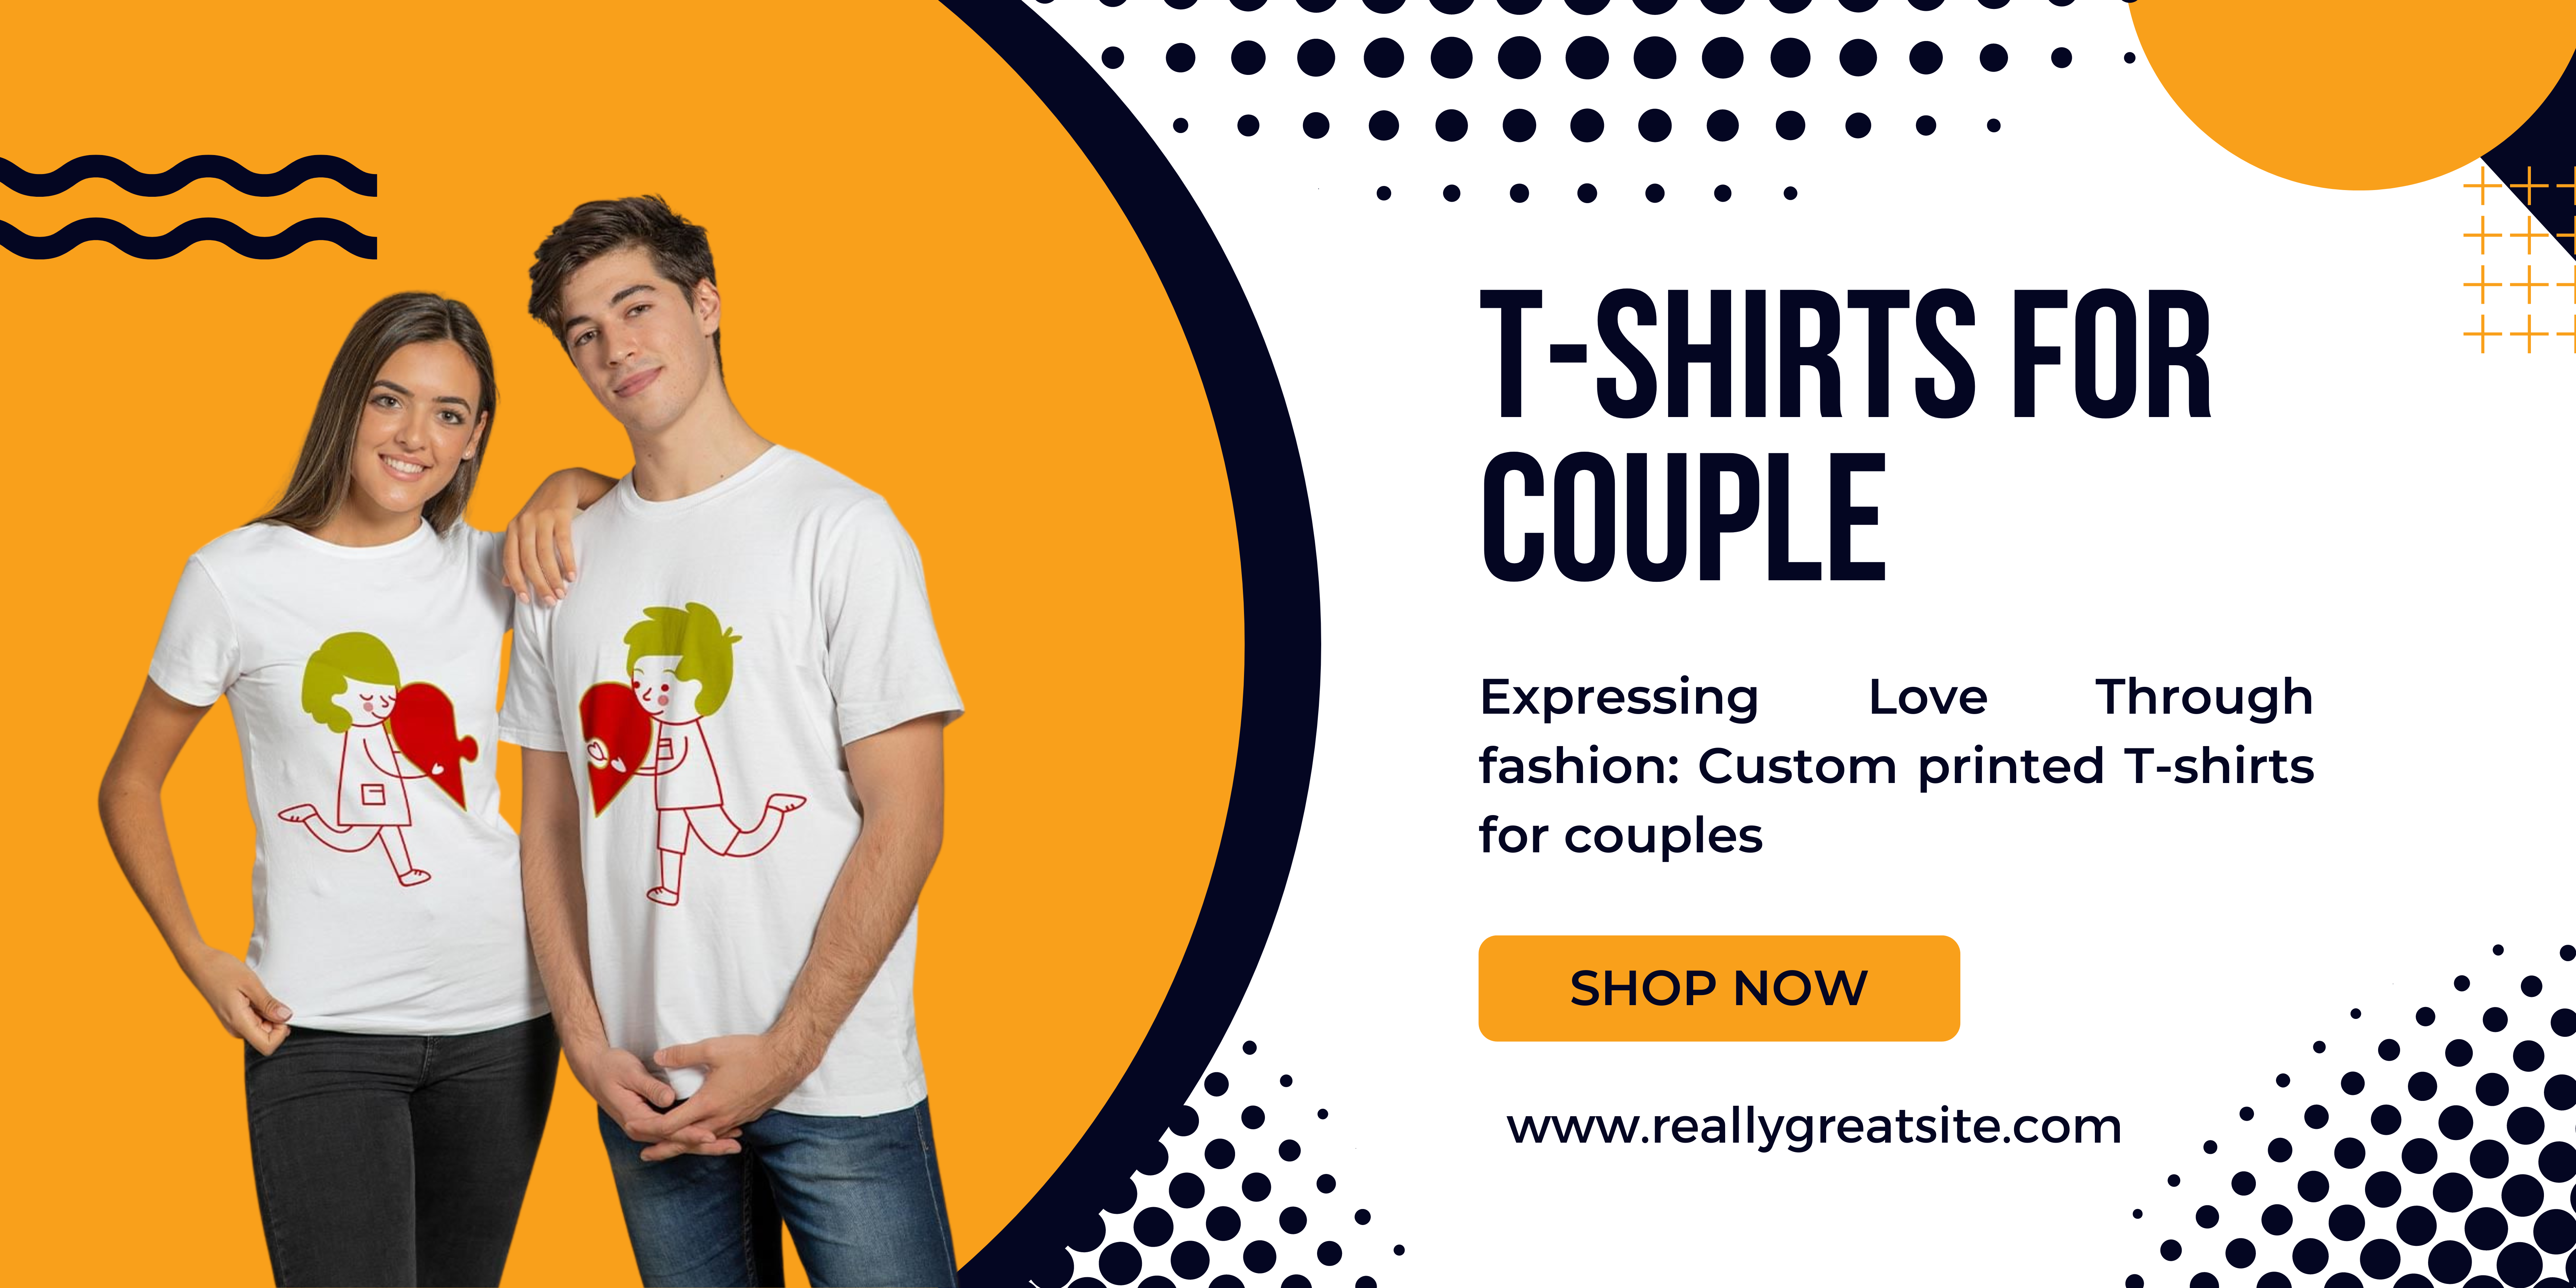 Custom printed T-shirts for couples